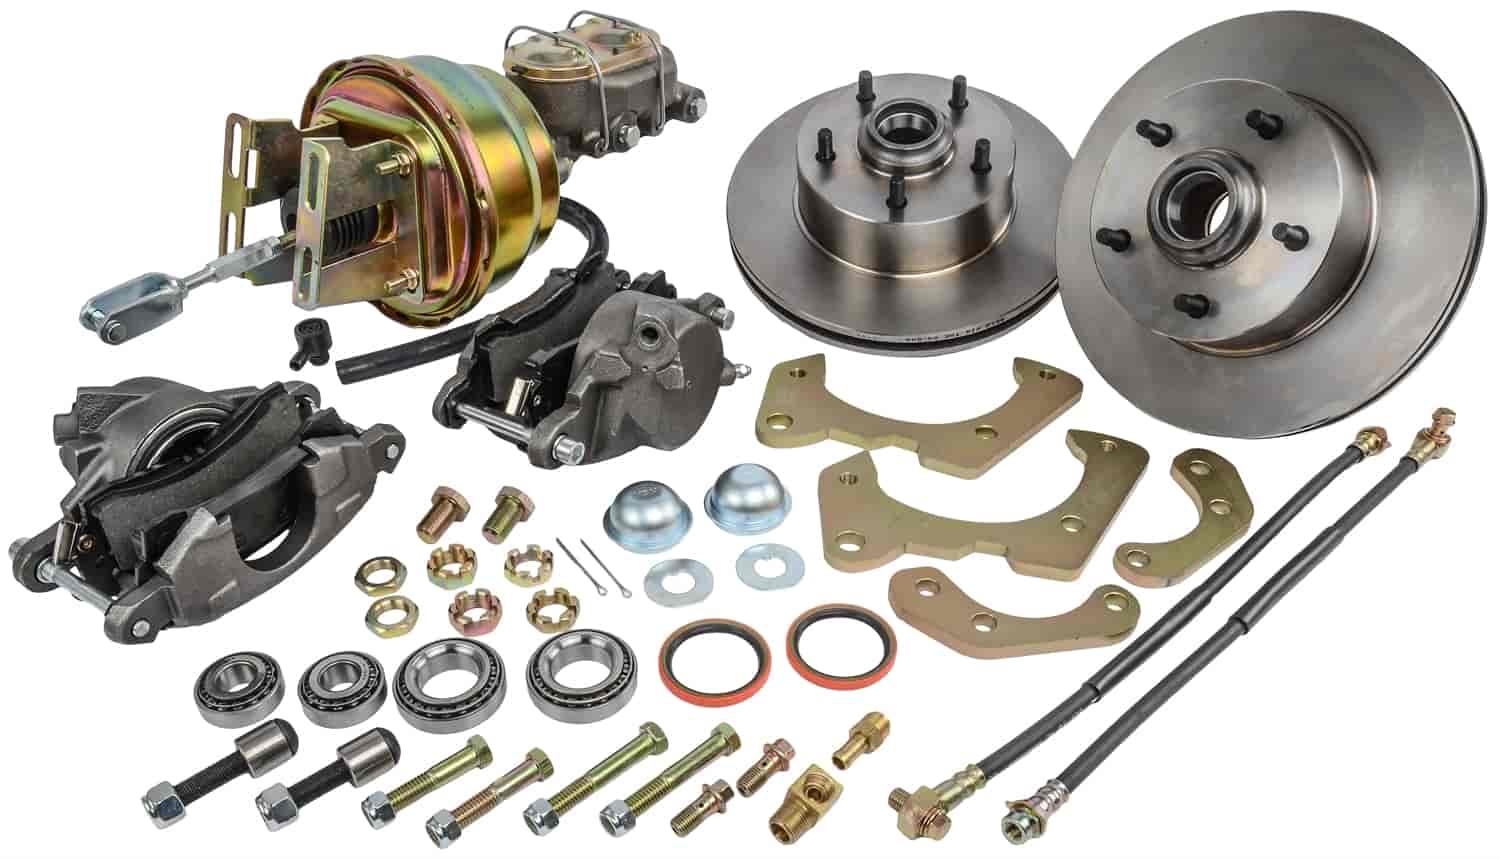 Front Complete Power Disc Brake Conversion Kit for 1959-1964 Chevrolet Impala/Bel-Air